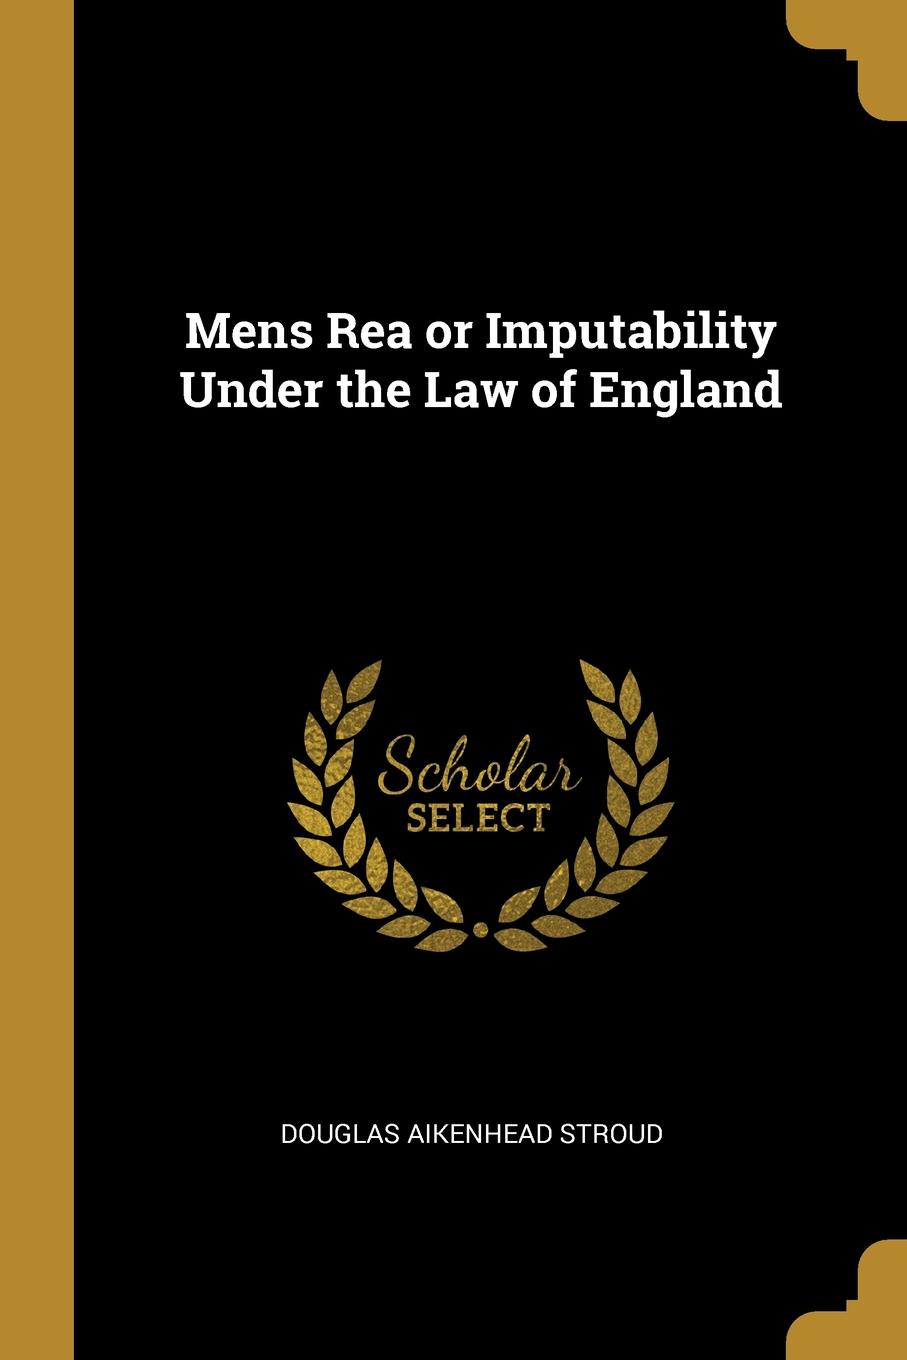 Mens Rea or Imputability Under the Law of England